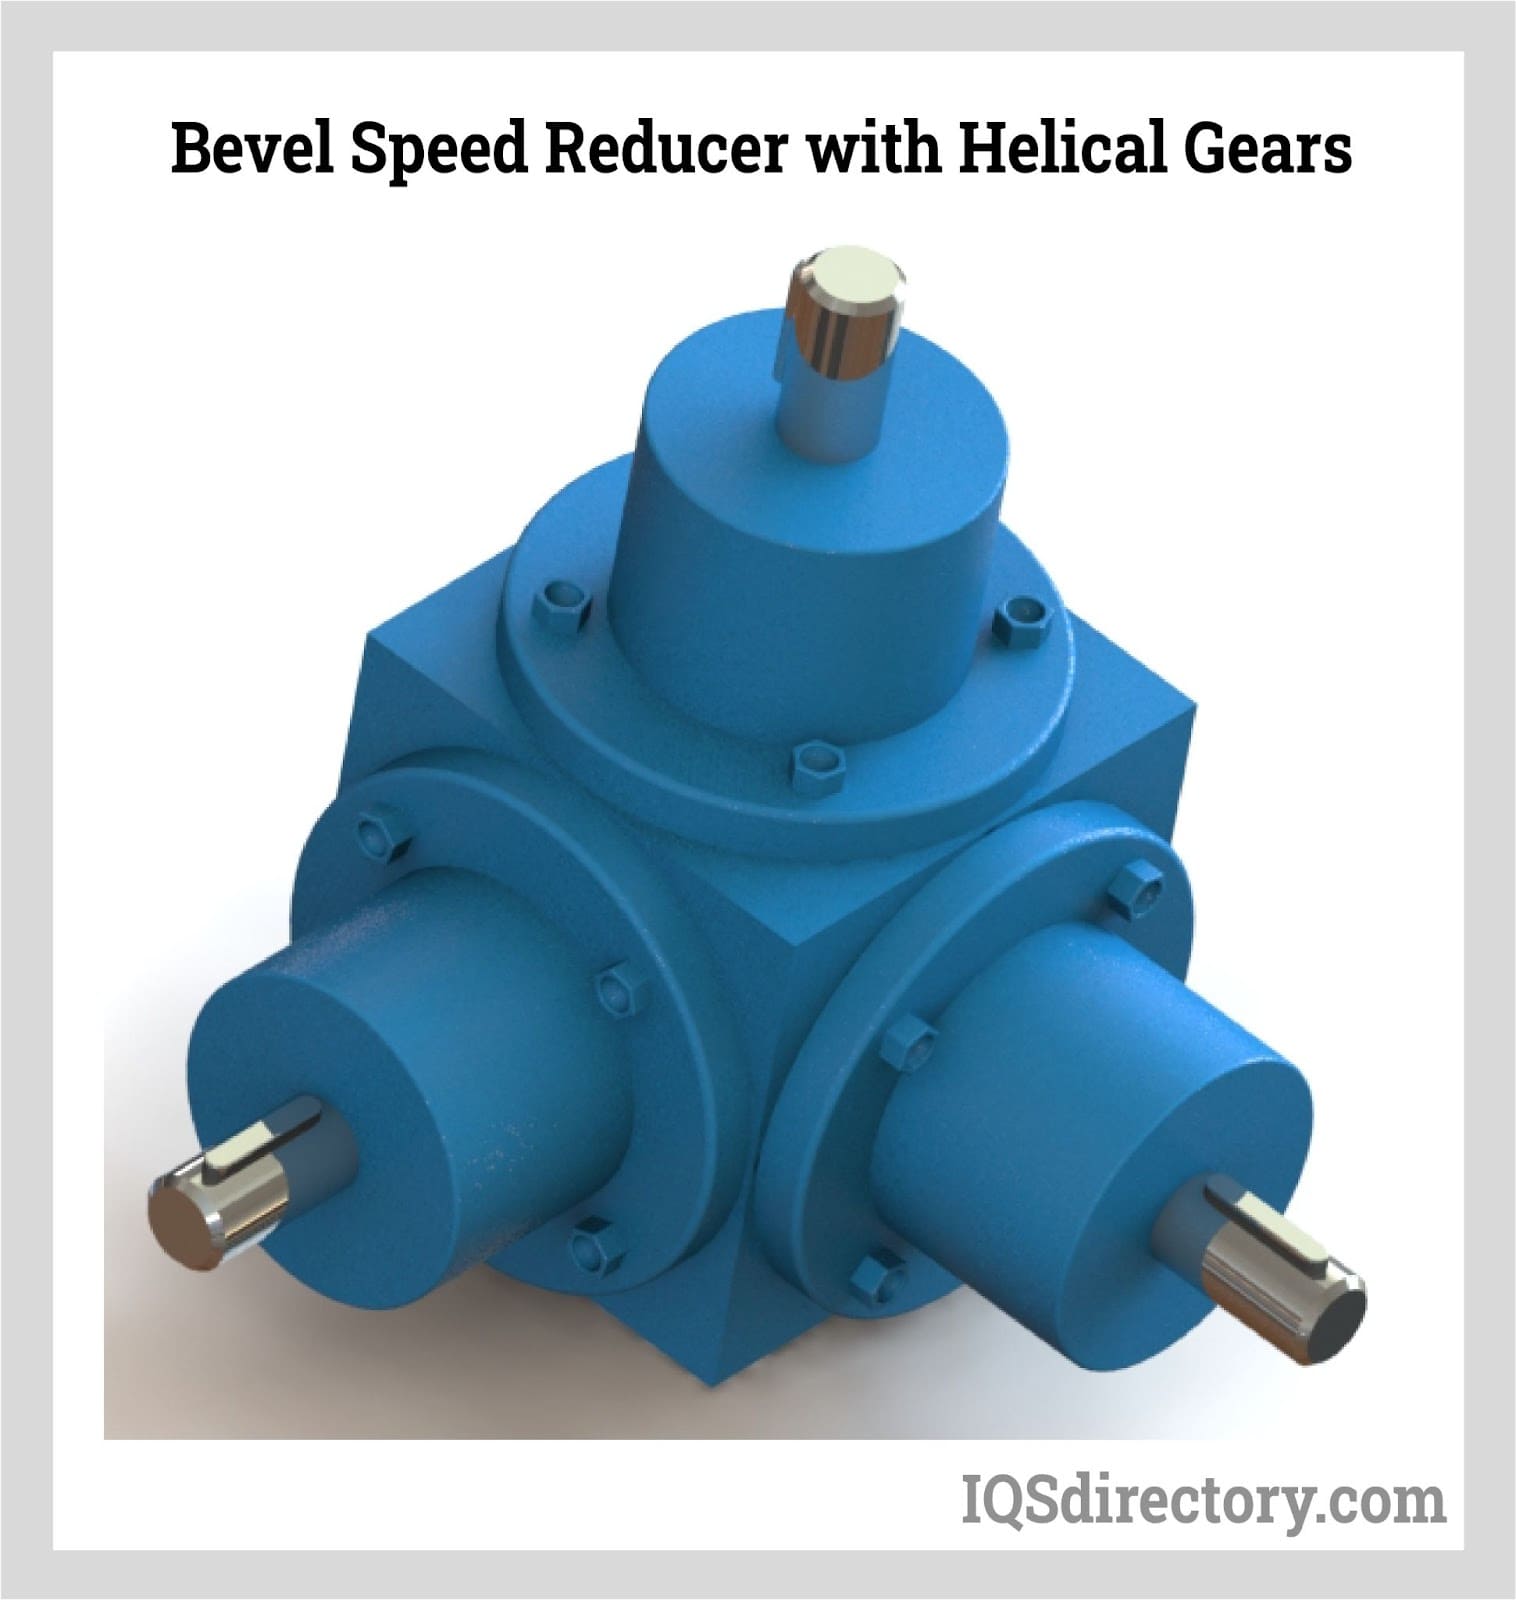 Bevel Speed Reducer with Helical Gears